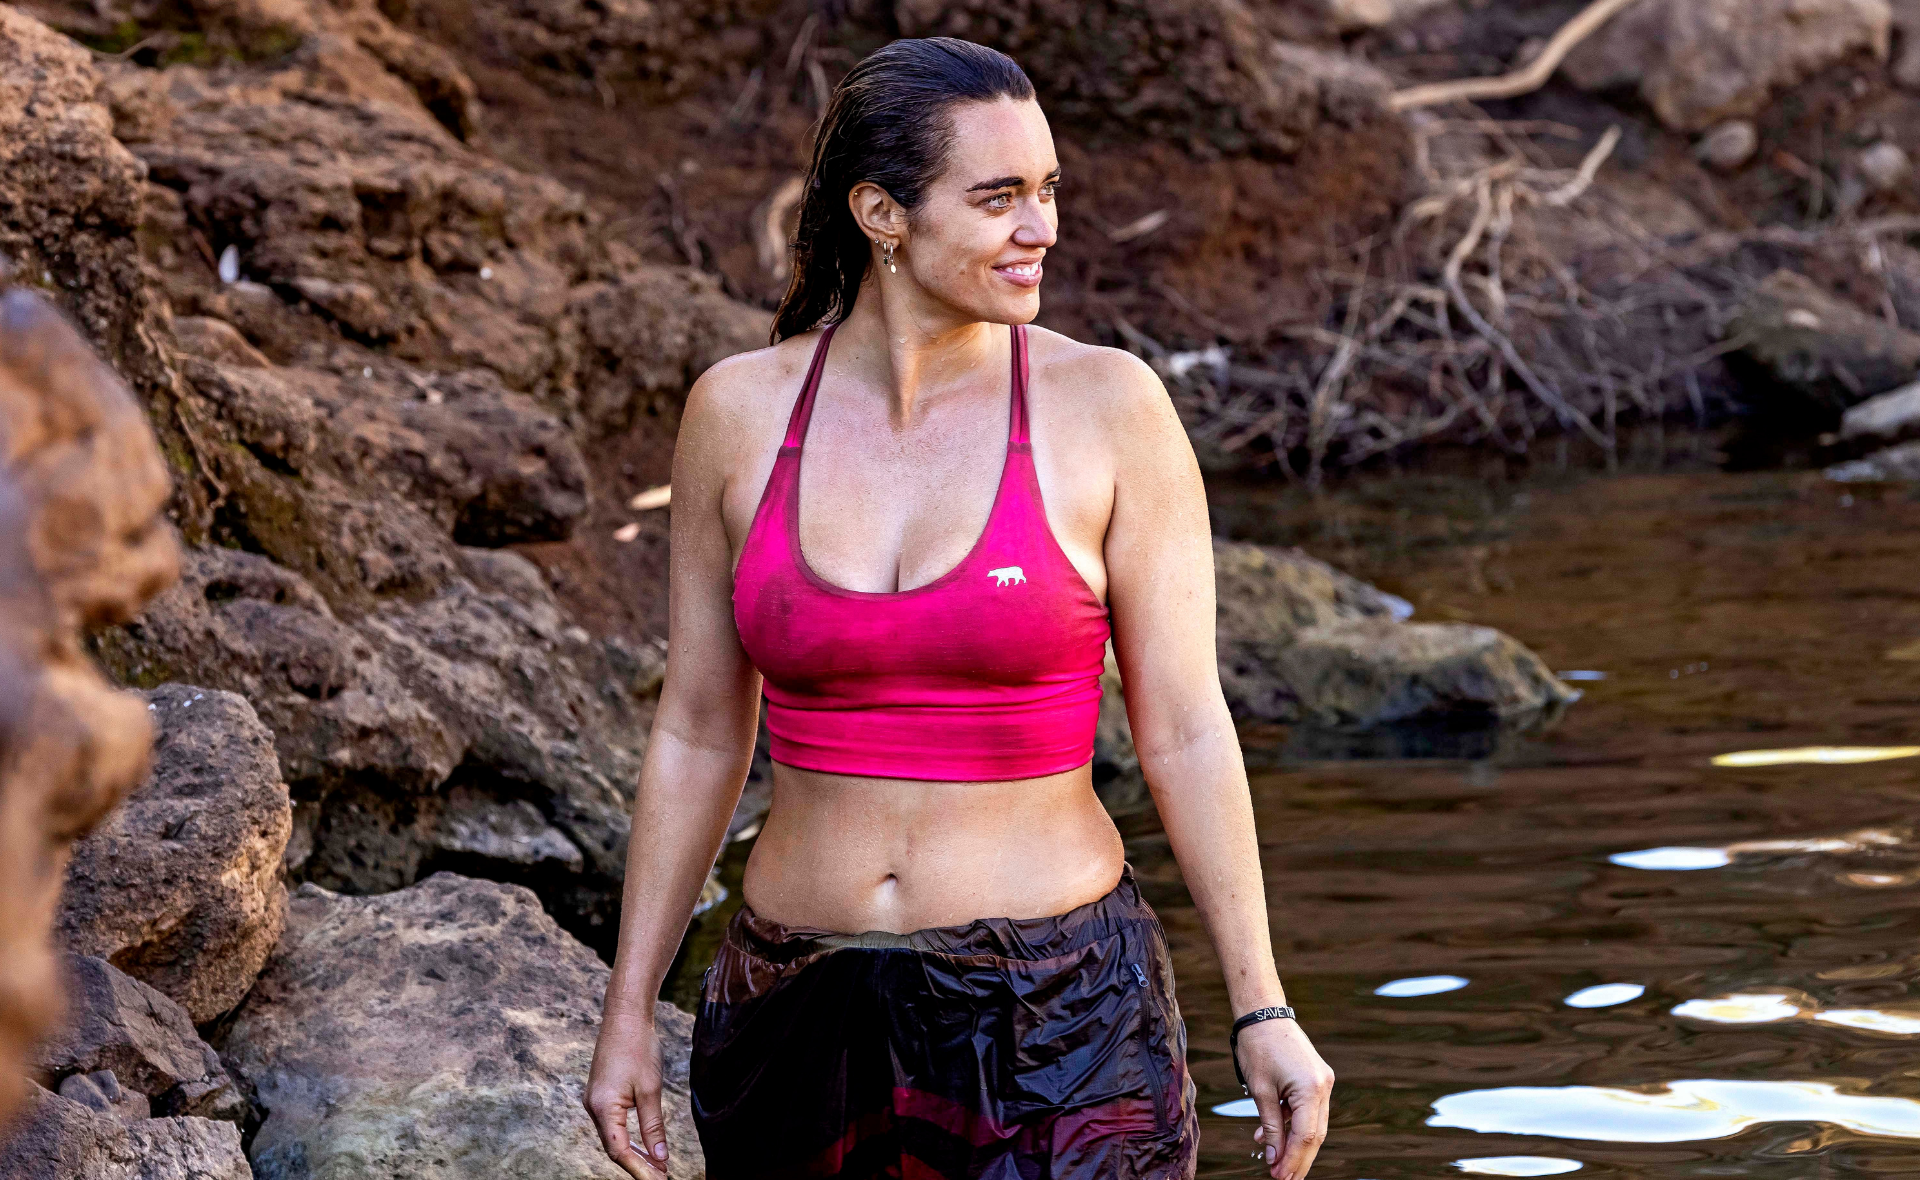 Australian Survivor star Laura Wells on her career as a model: “I’ve been told to lose weight”